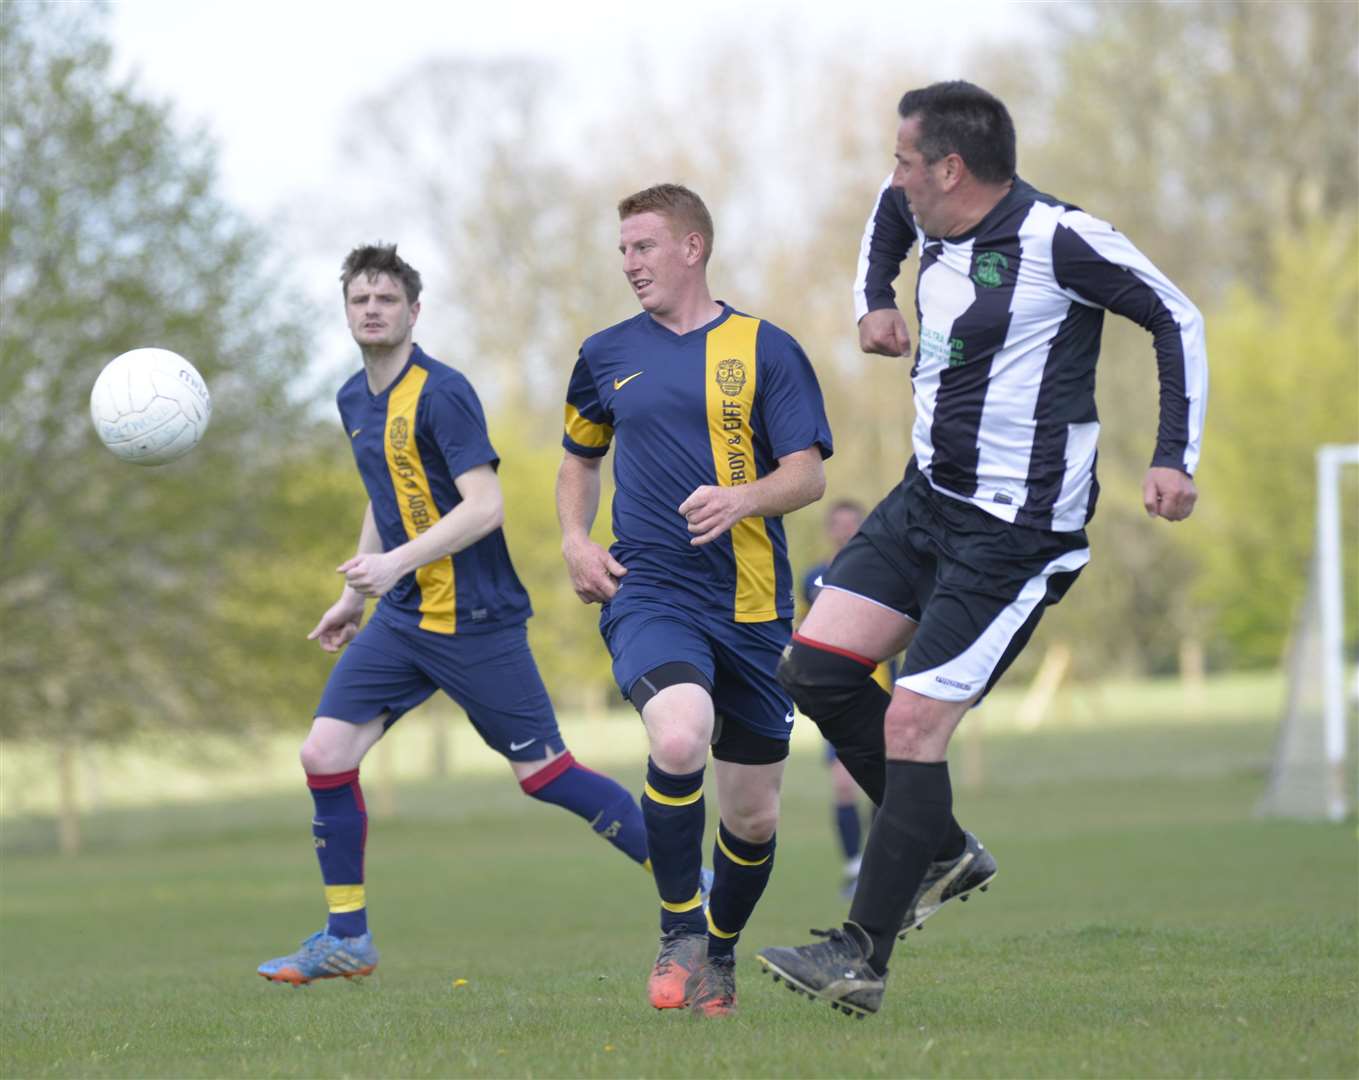 The Maidstone & District League needs new teams to survive